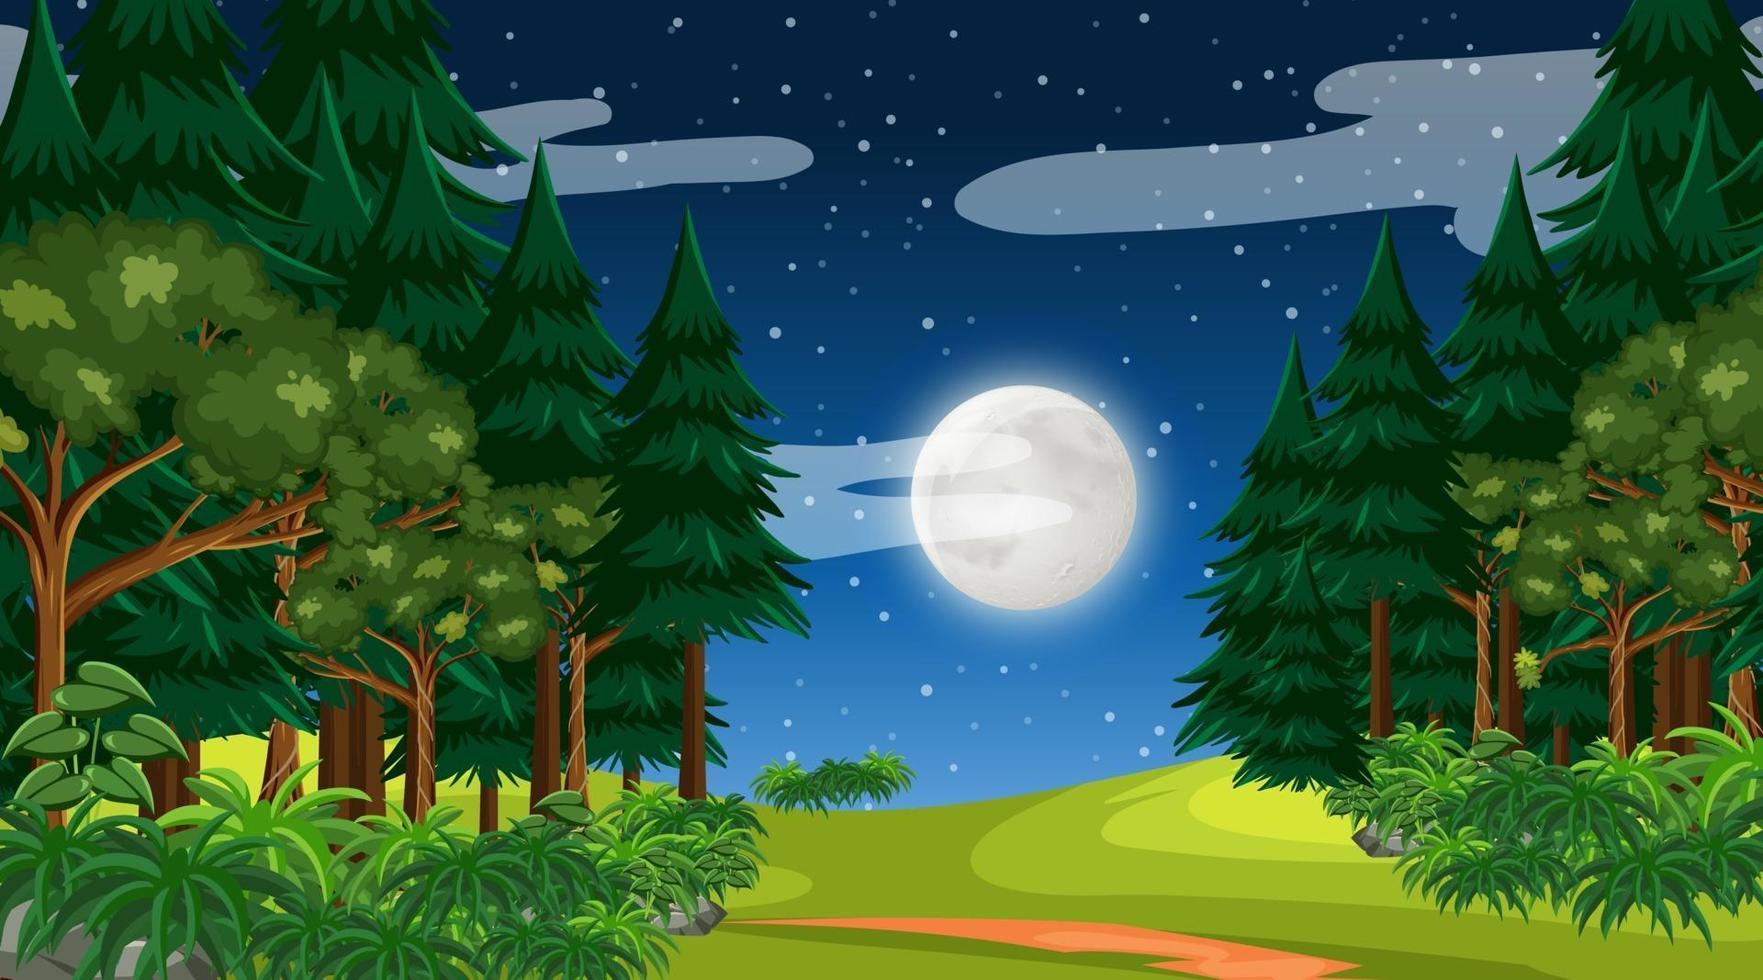 Rainforest or tropical forest at night scene with the moon in the sky vector